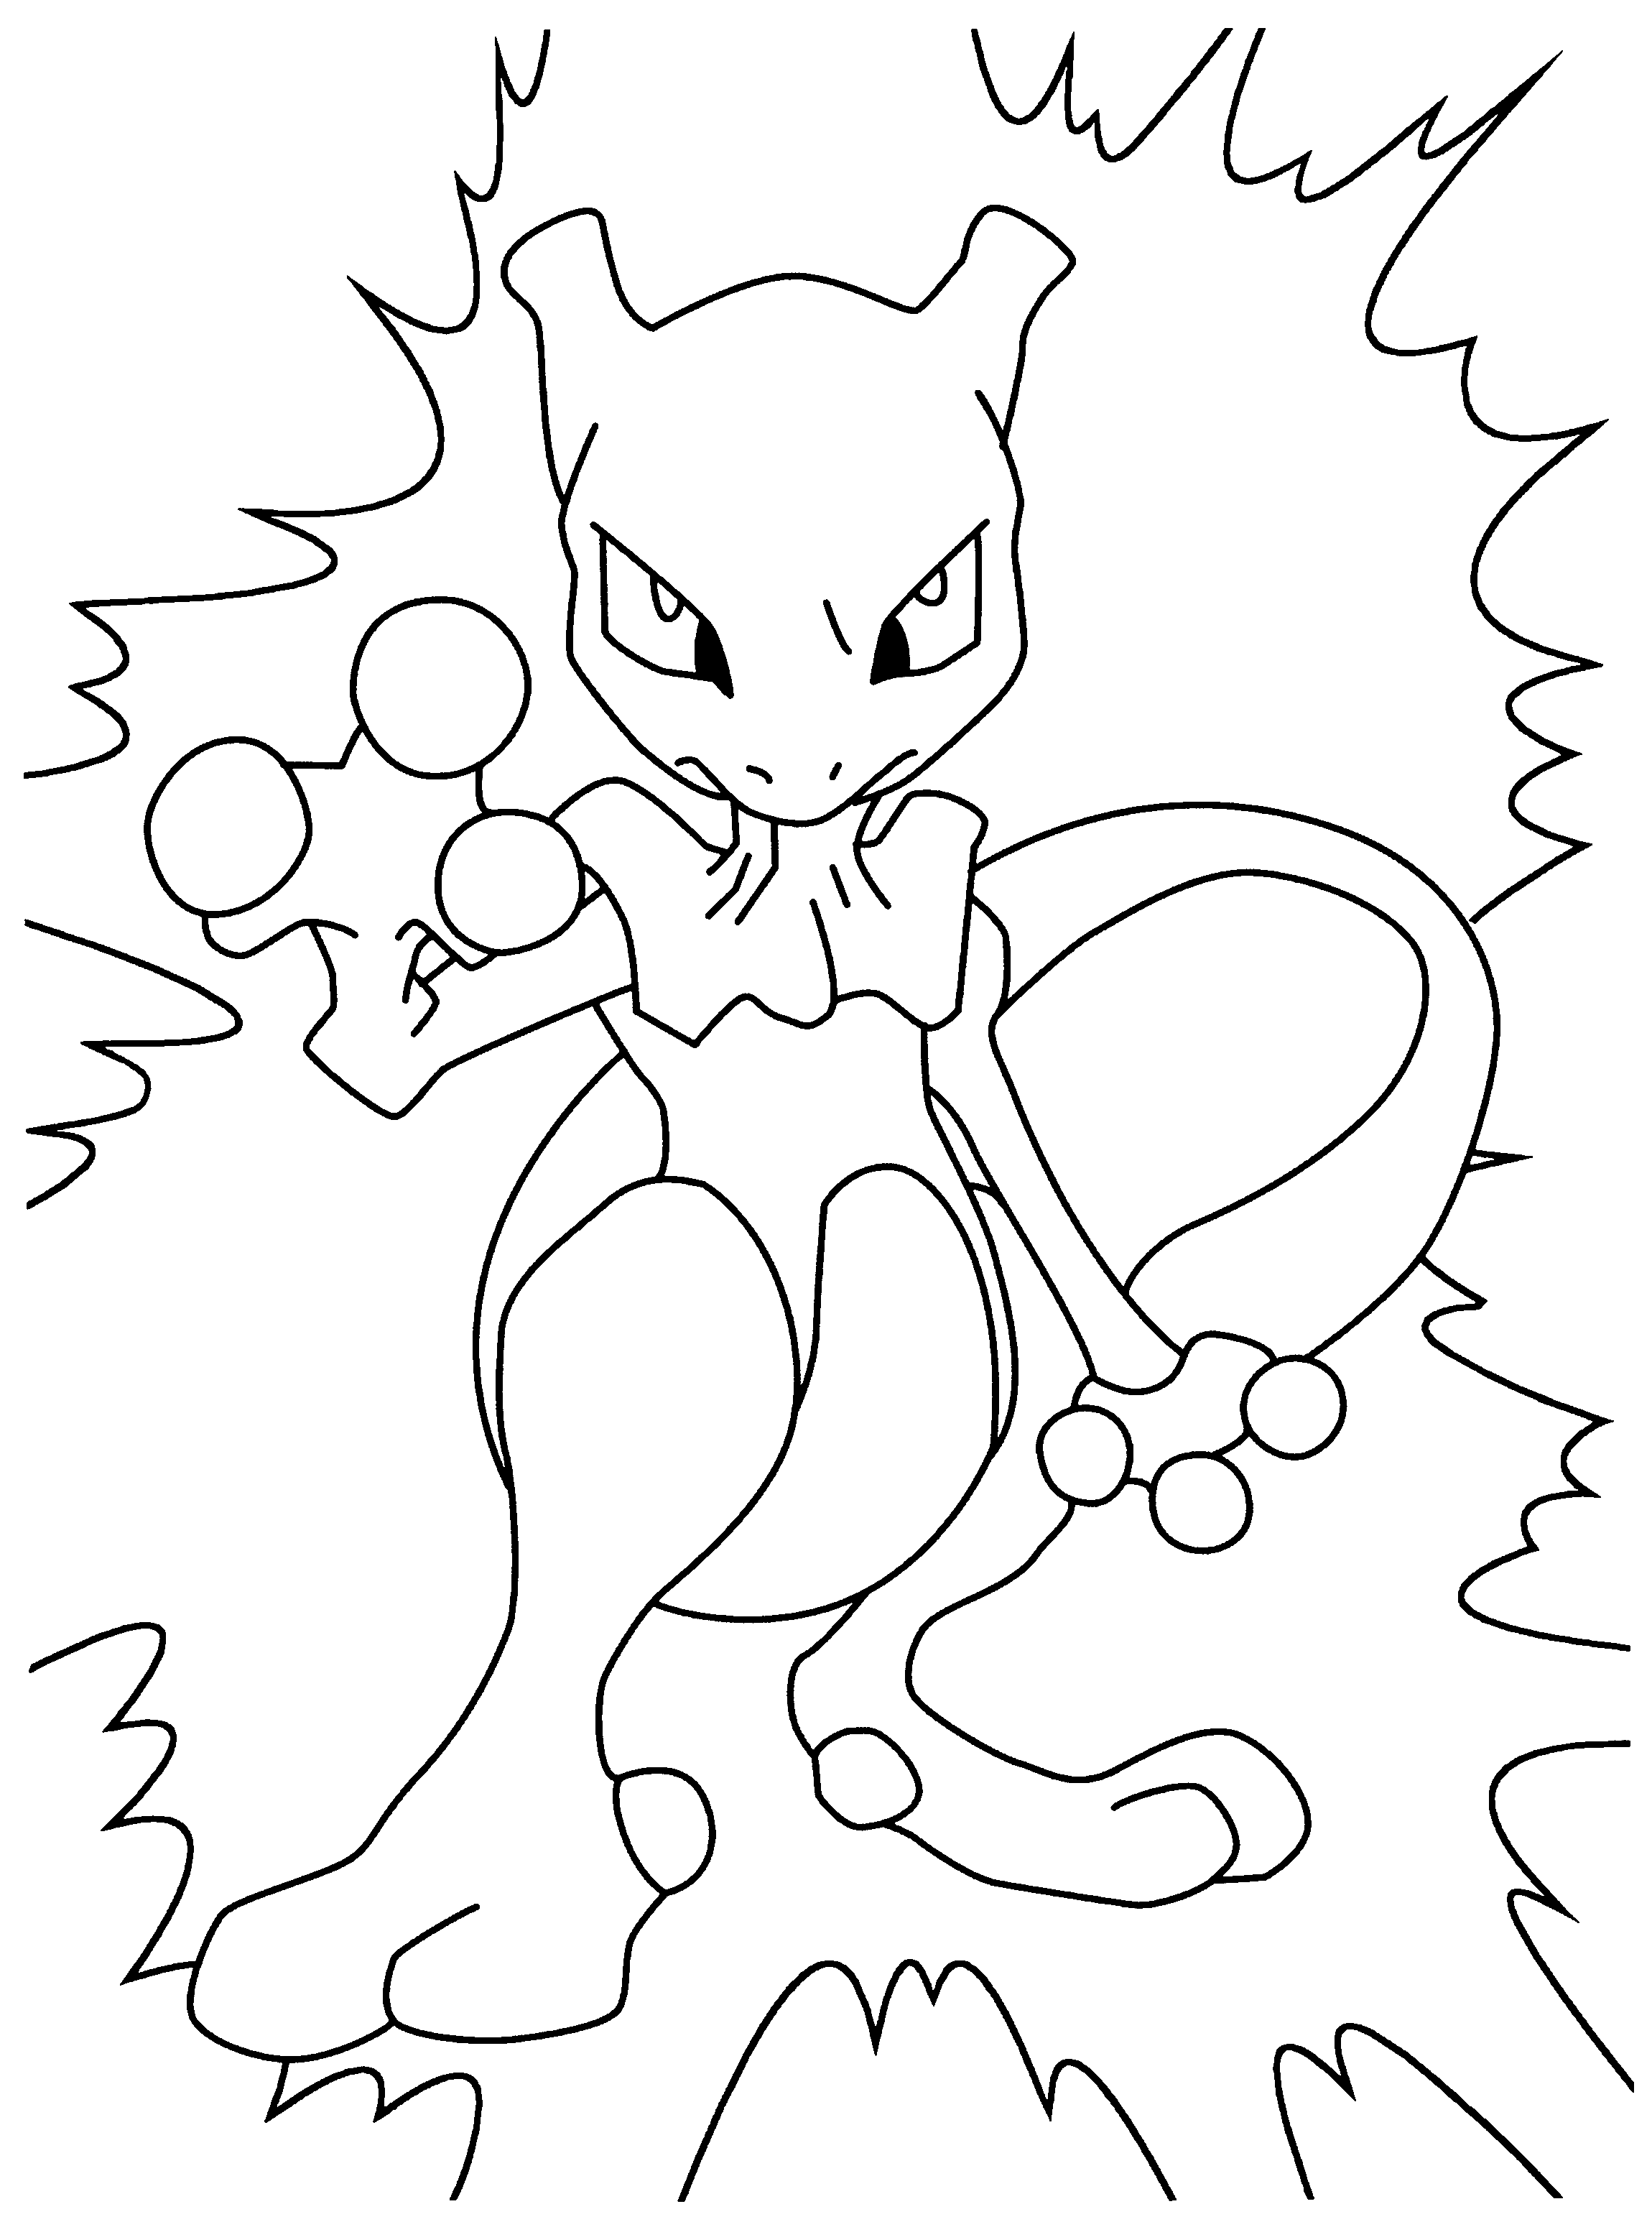 coloring pictures of pokemon pokemon coloring pages join your favorite pokemon on an coloring pictures of pokemon 